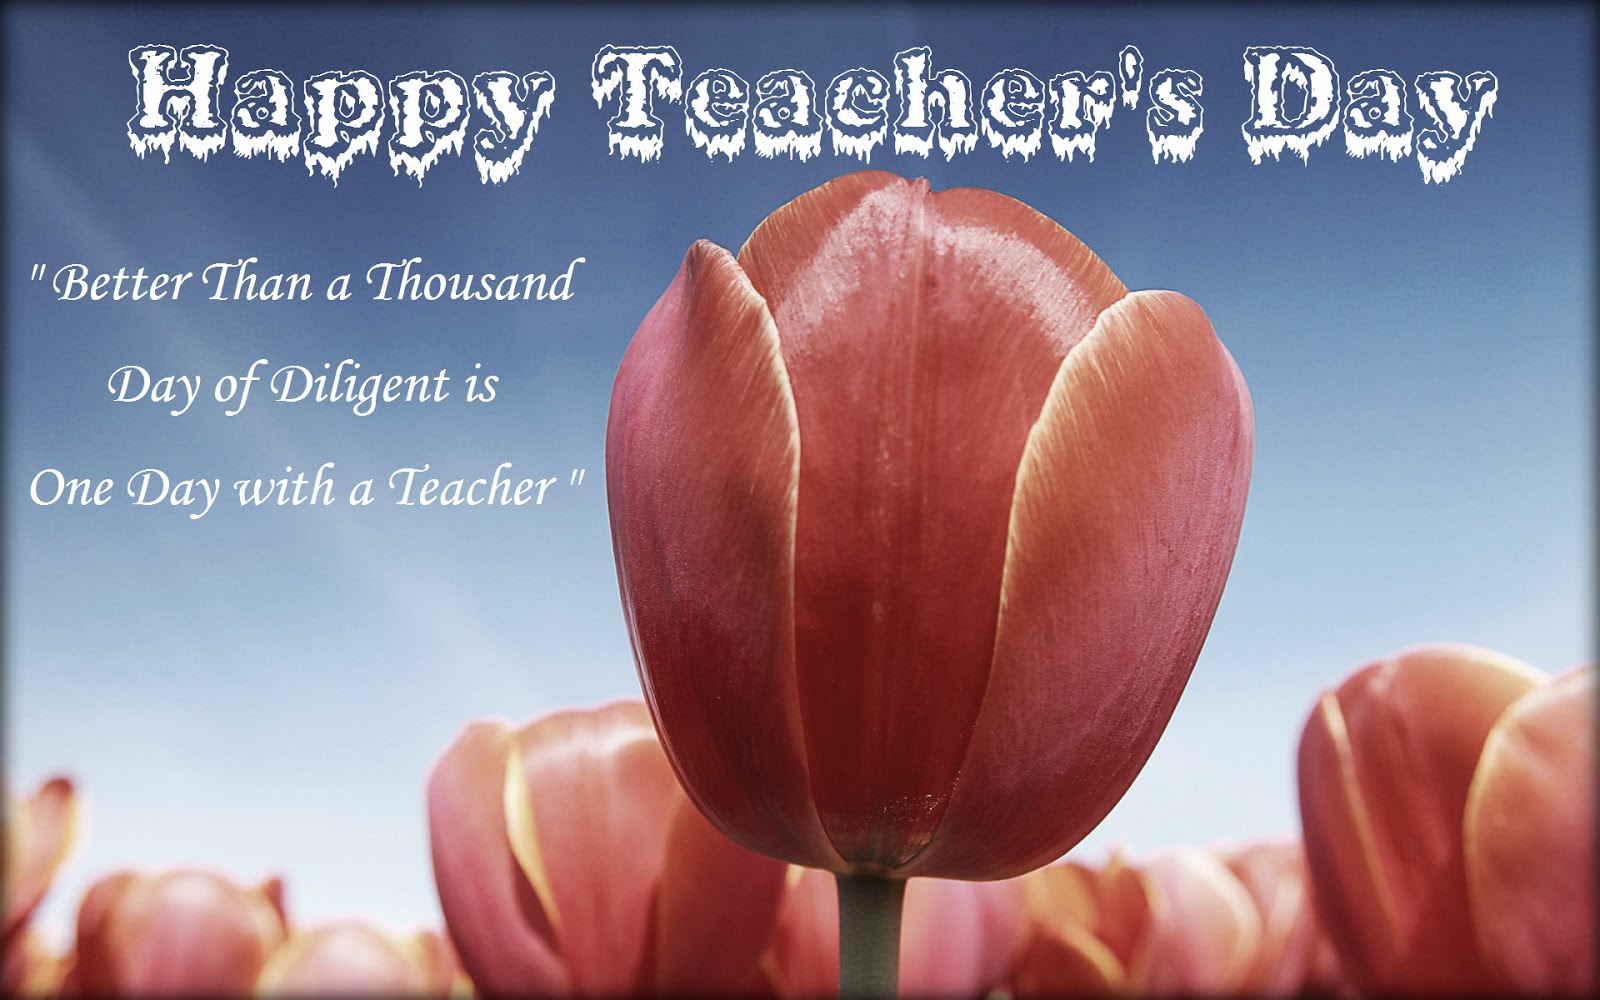 Teacher’s Day 2011 HD Wallpapers | Happy Teacher’s Day Pictures ...